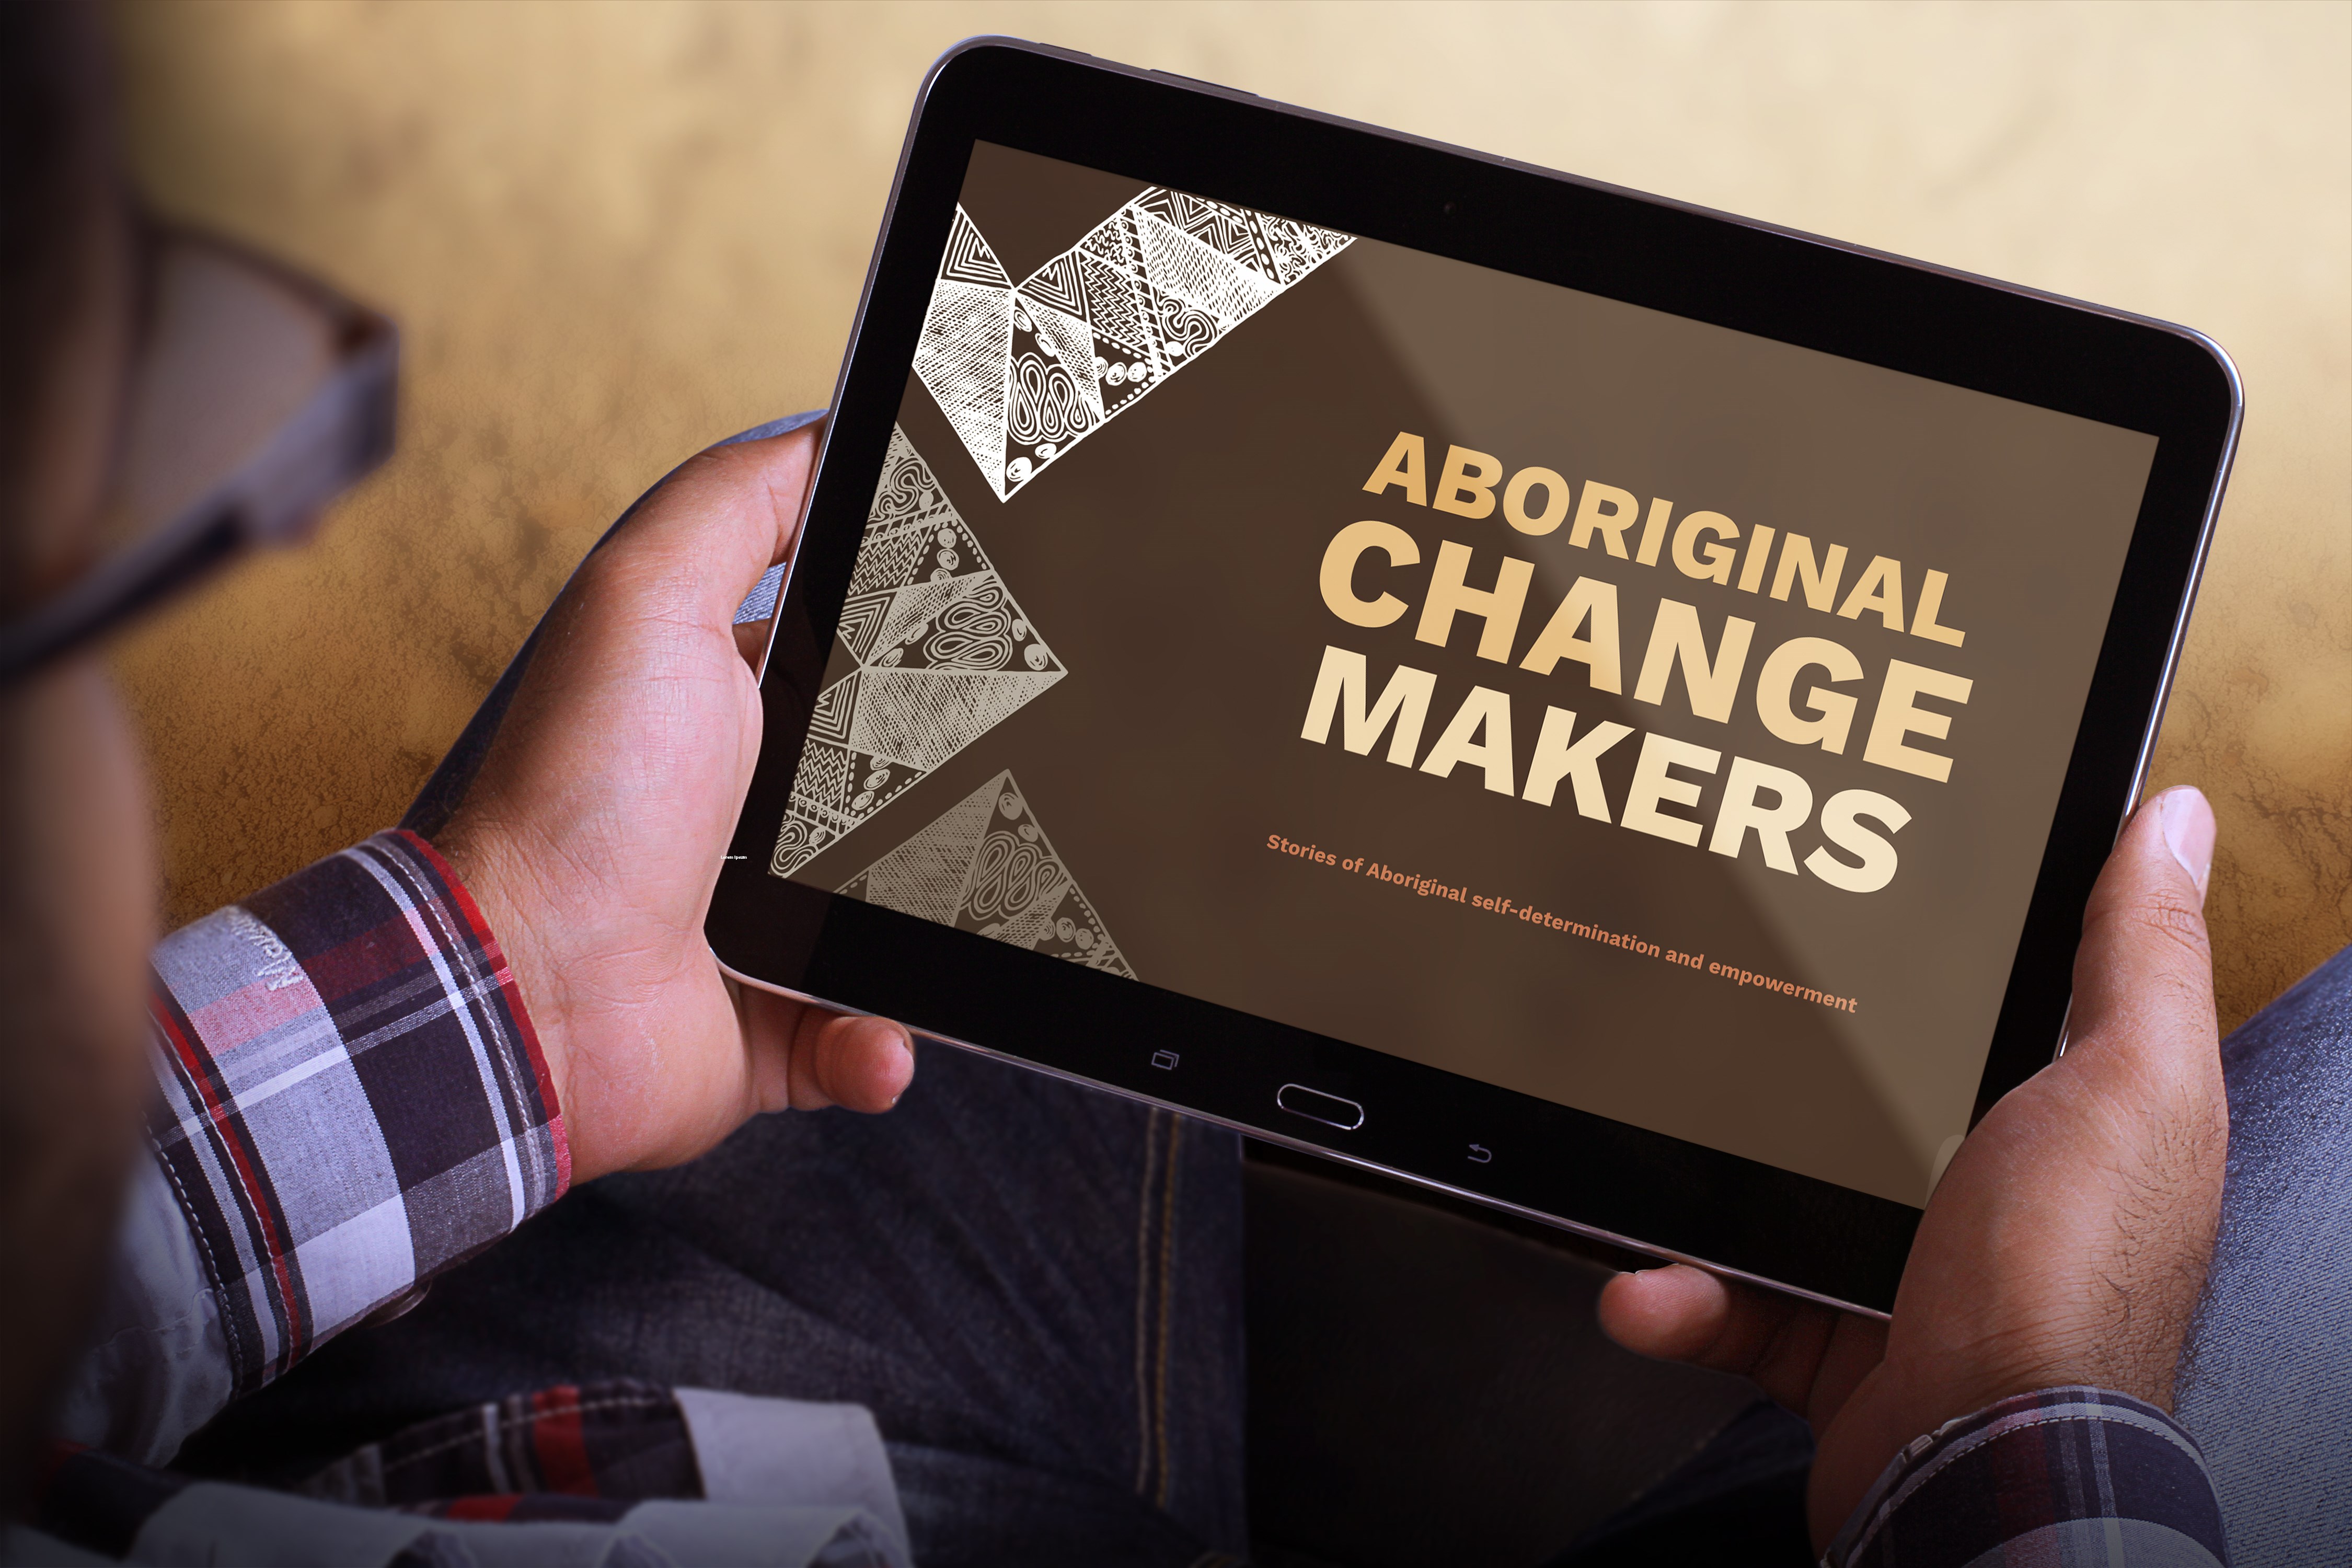 Aboriginal Change Makers resource launched